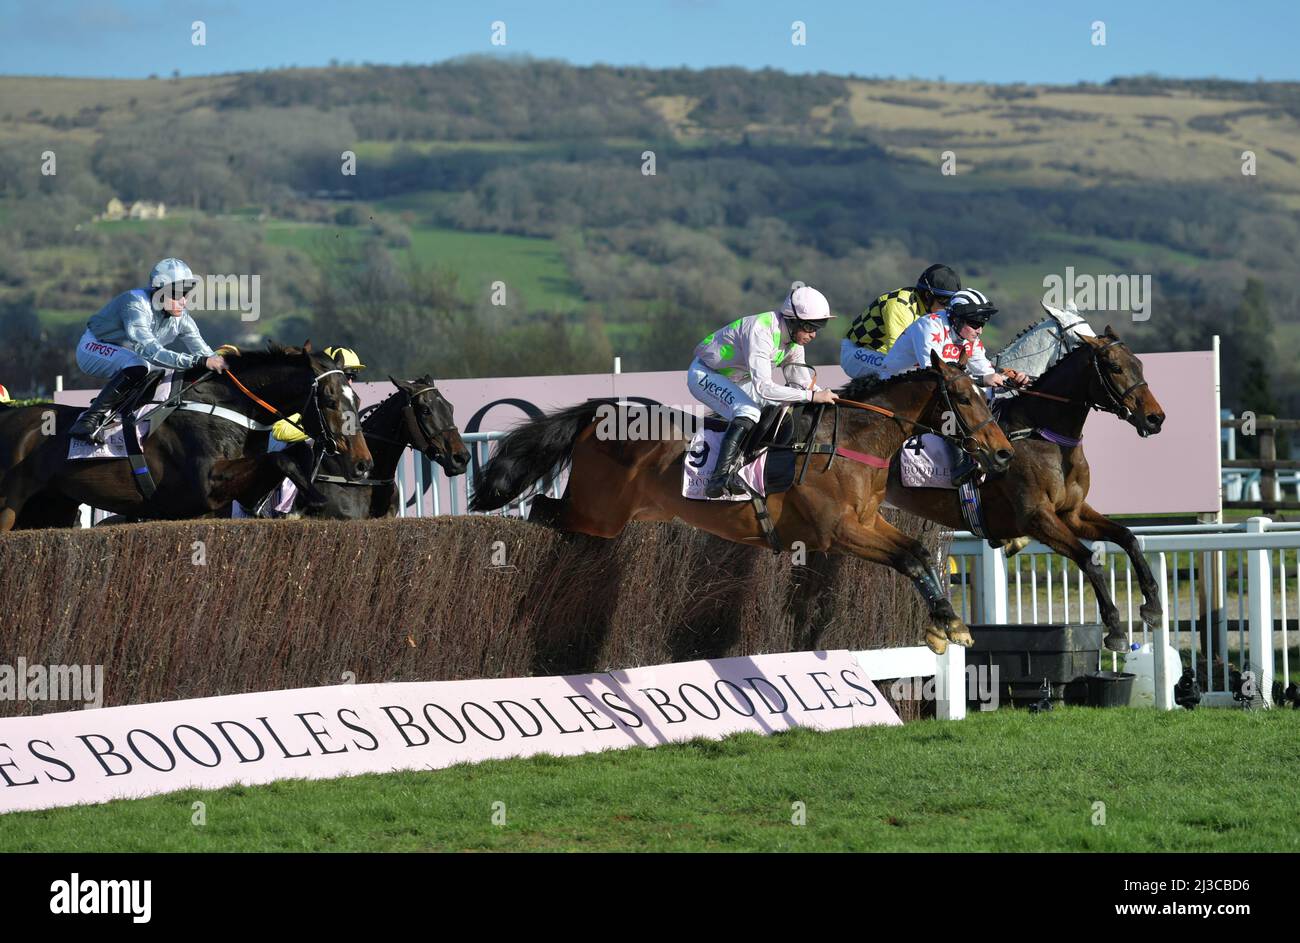 Gold Cup   L2r Royale Pagaille ridden by Charlie Deutsch, Aye Right ridden by Callum Bewley and Asterion Forlonge ridden by Bryan Cooper jumping along Stock Photo